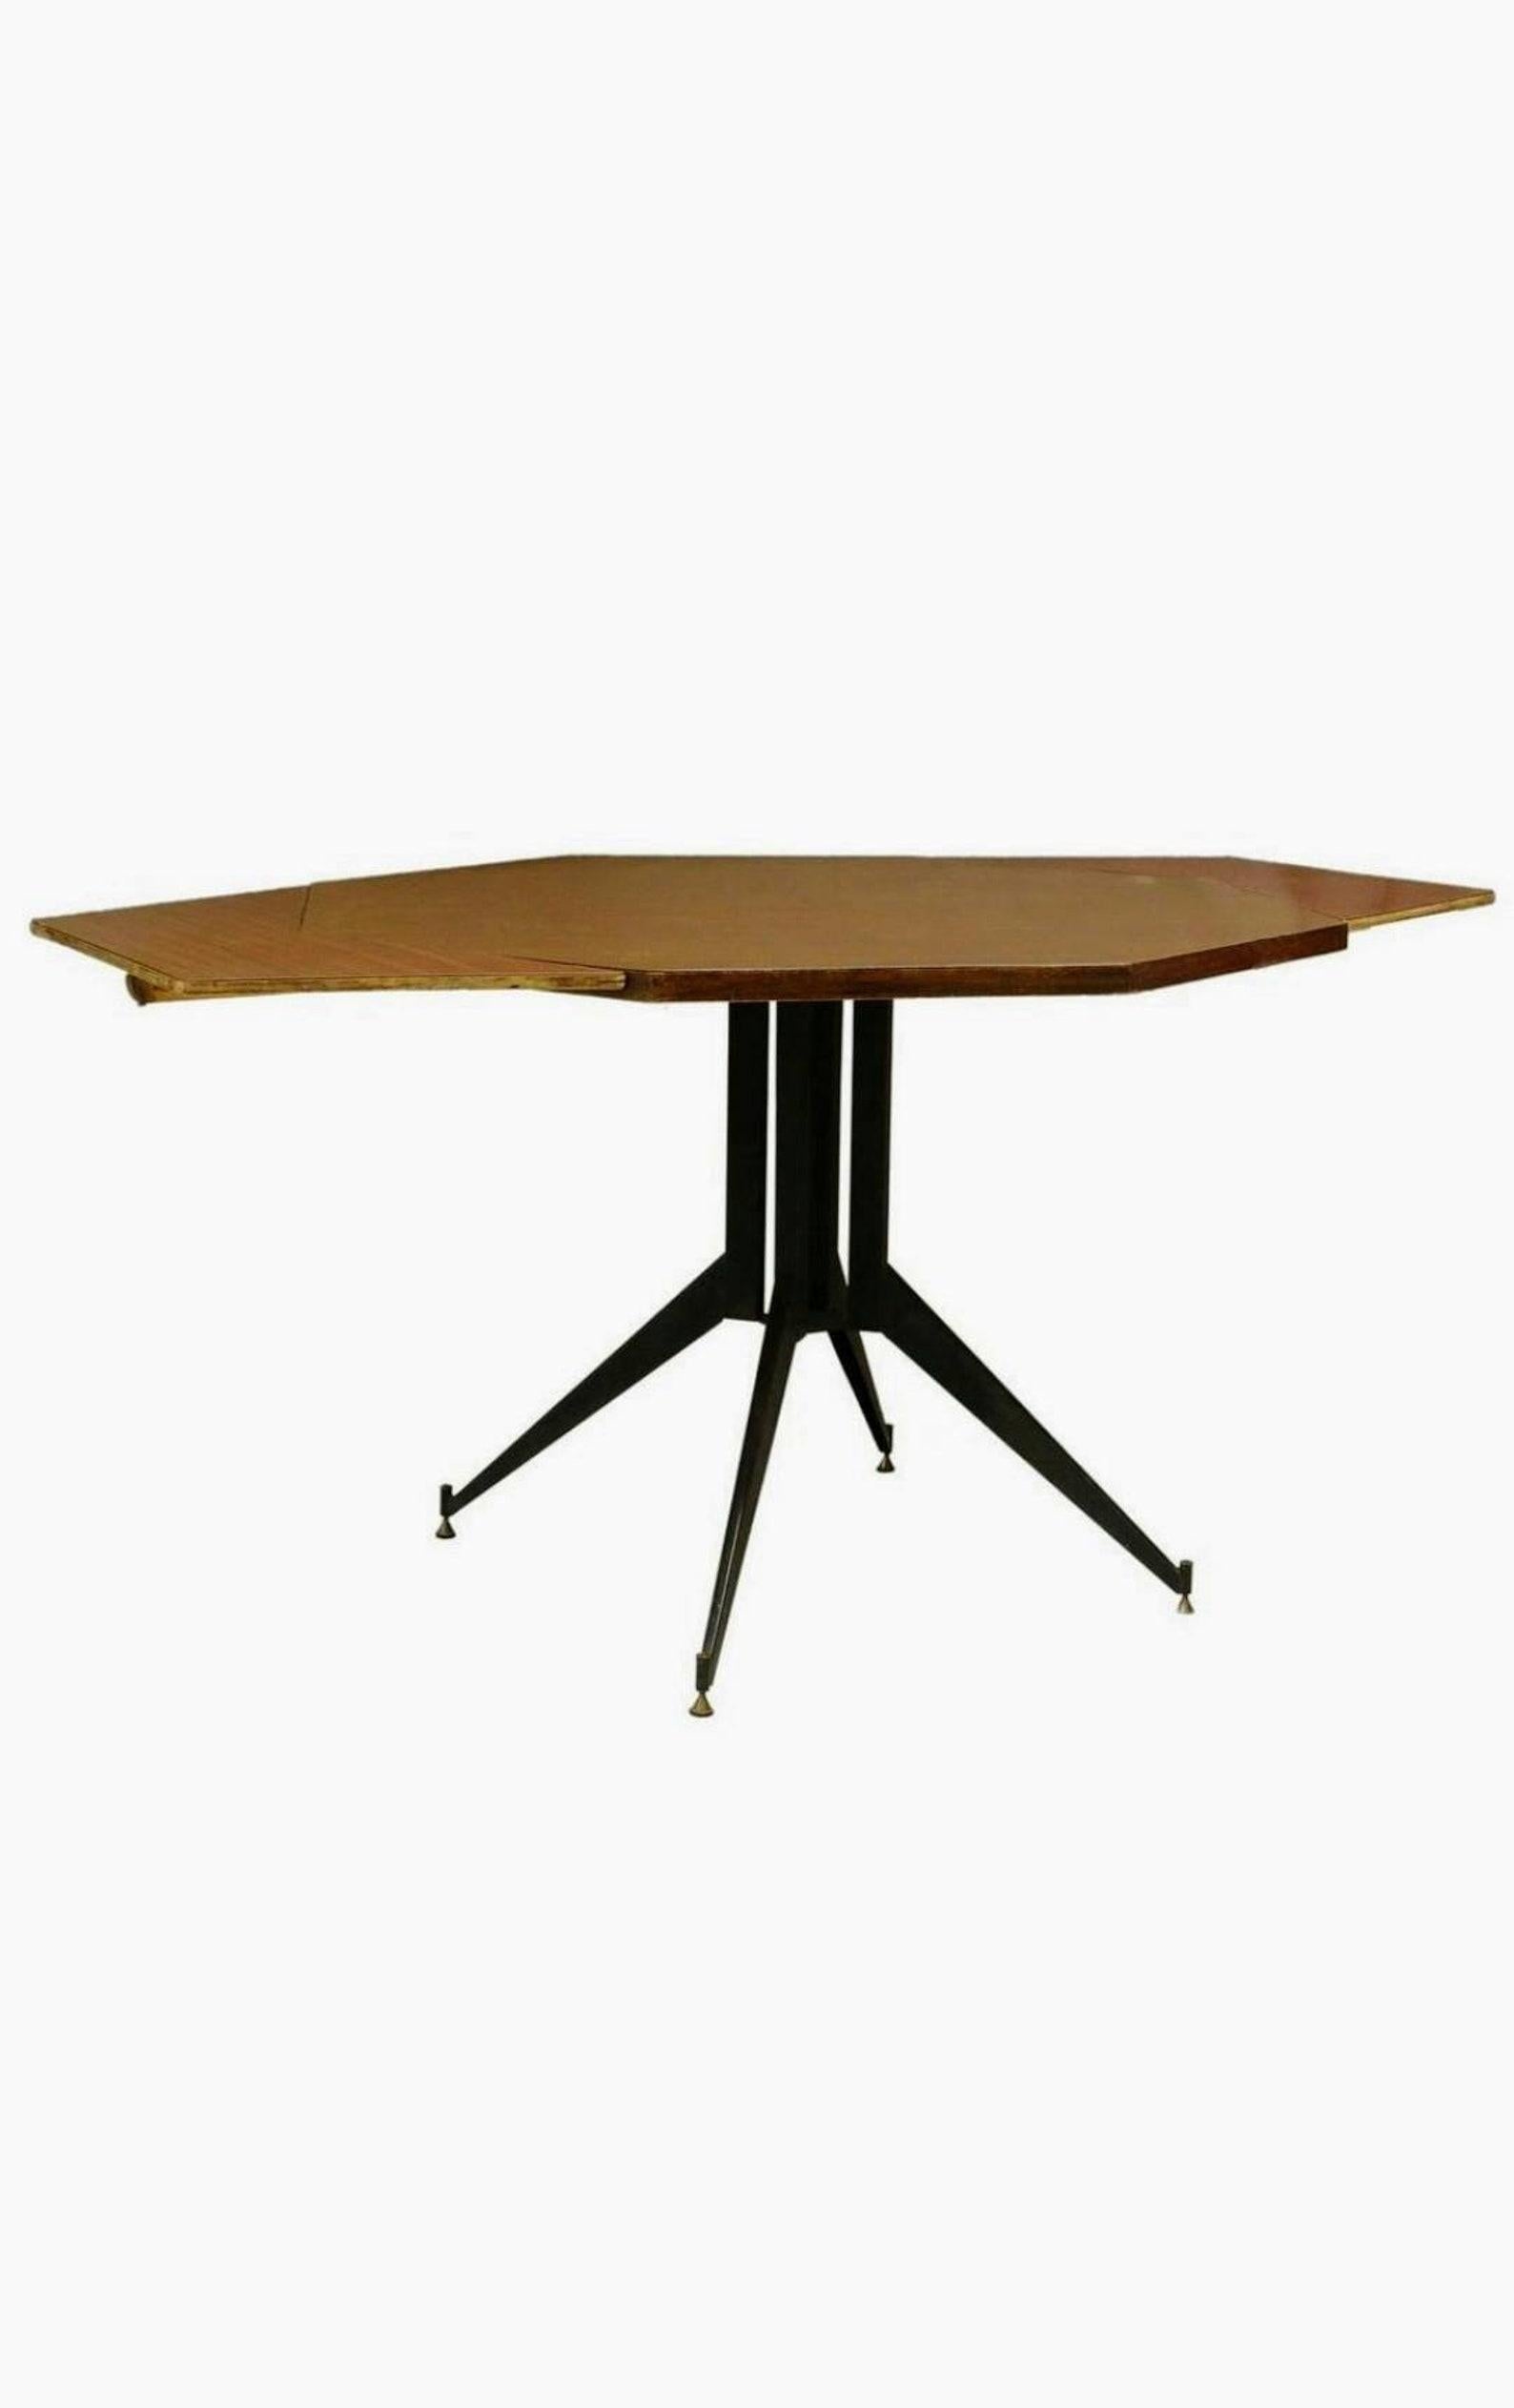 A Mid-Century Modern dining / center table, Italy, circa 1960s, having a laminate octagonal tabletop, rising on an iron pedestal base, accompanied by a pair of angular leaves. Attributed to Italian Modernist designer Carlo Ratti.

Dimensions: